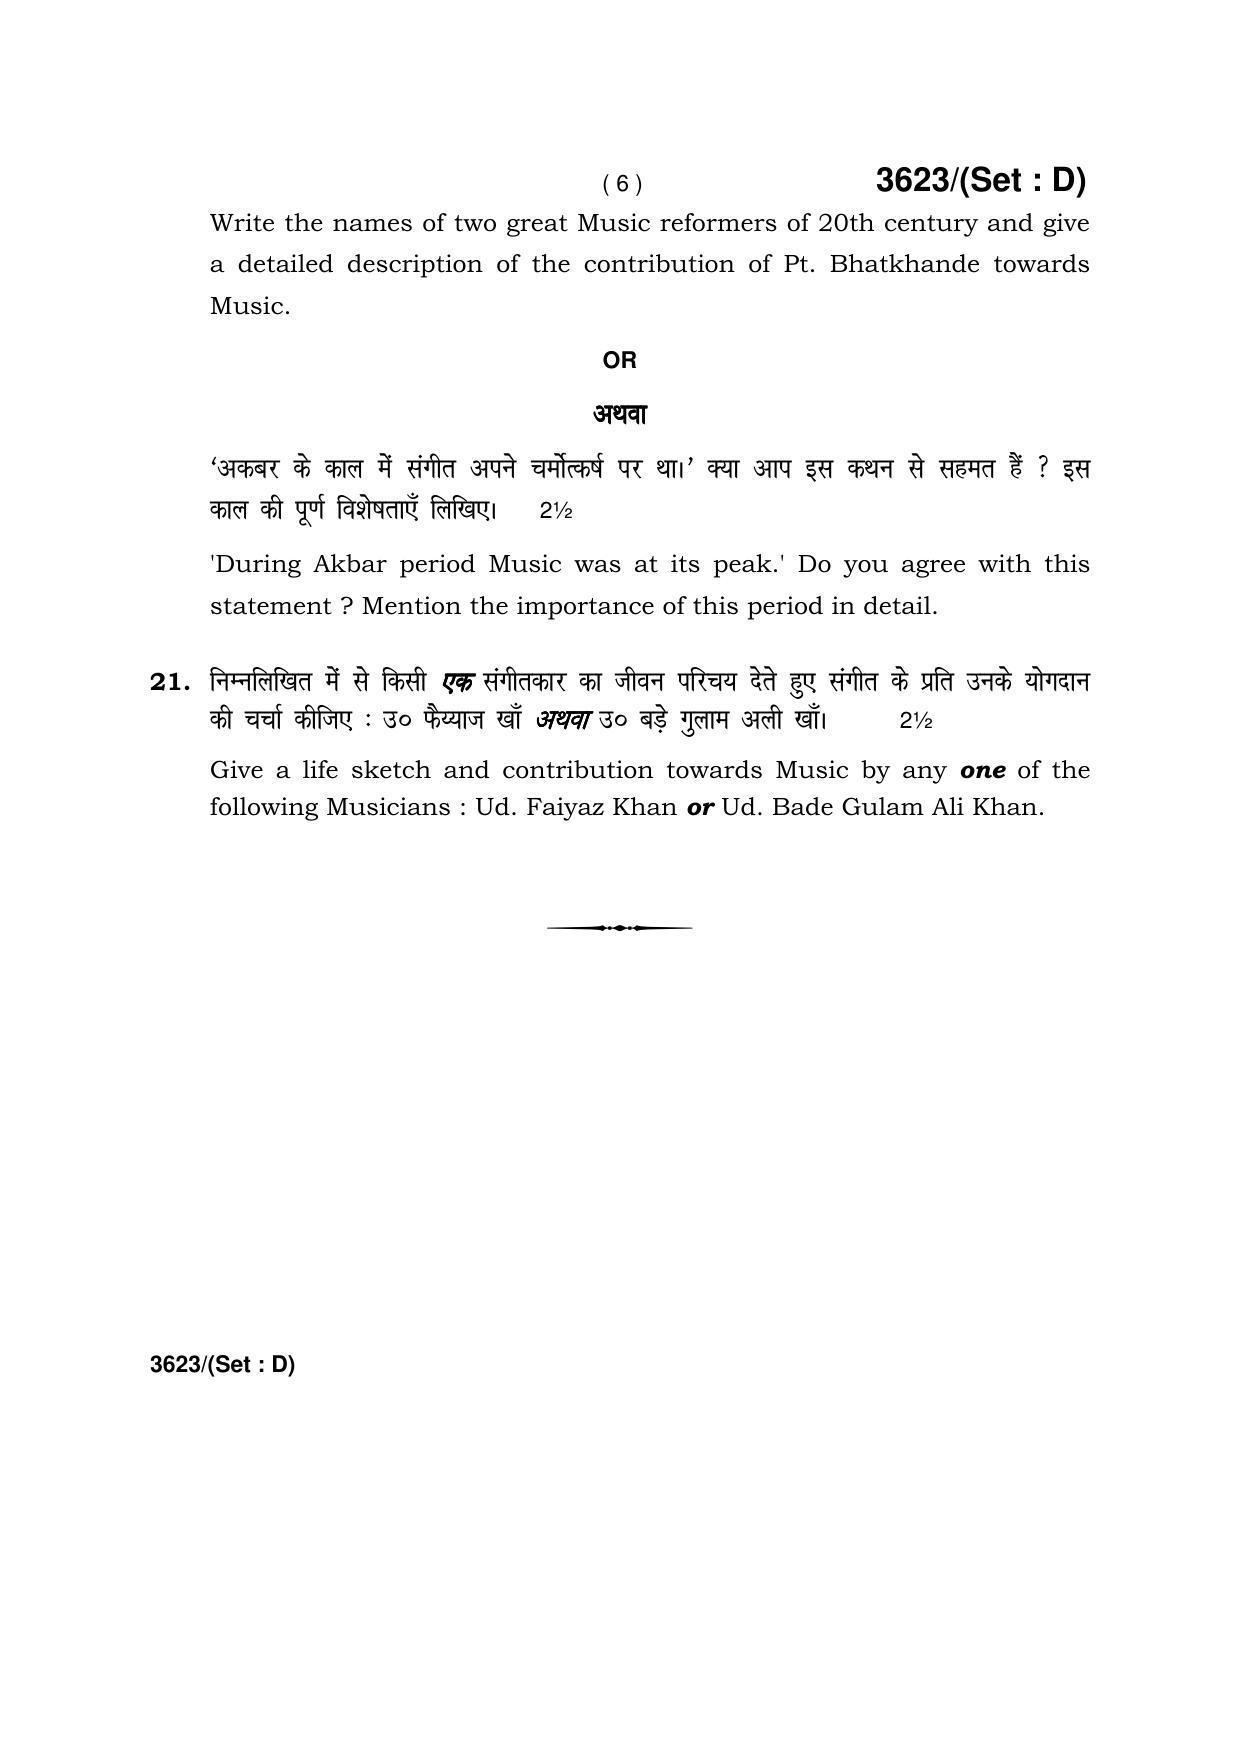 Haryana Board HBSE Class 12 Music Hindustani (Vocal) -D 2018 Question Paper - Page 6